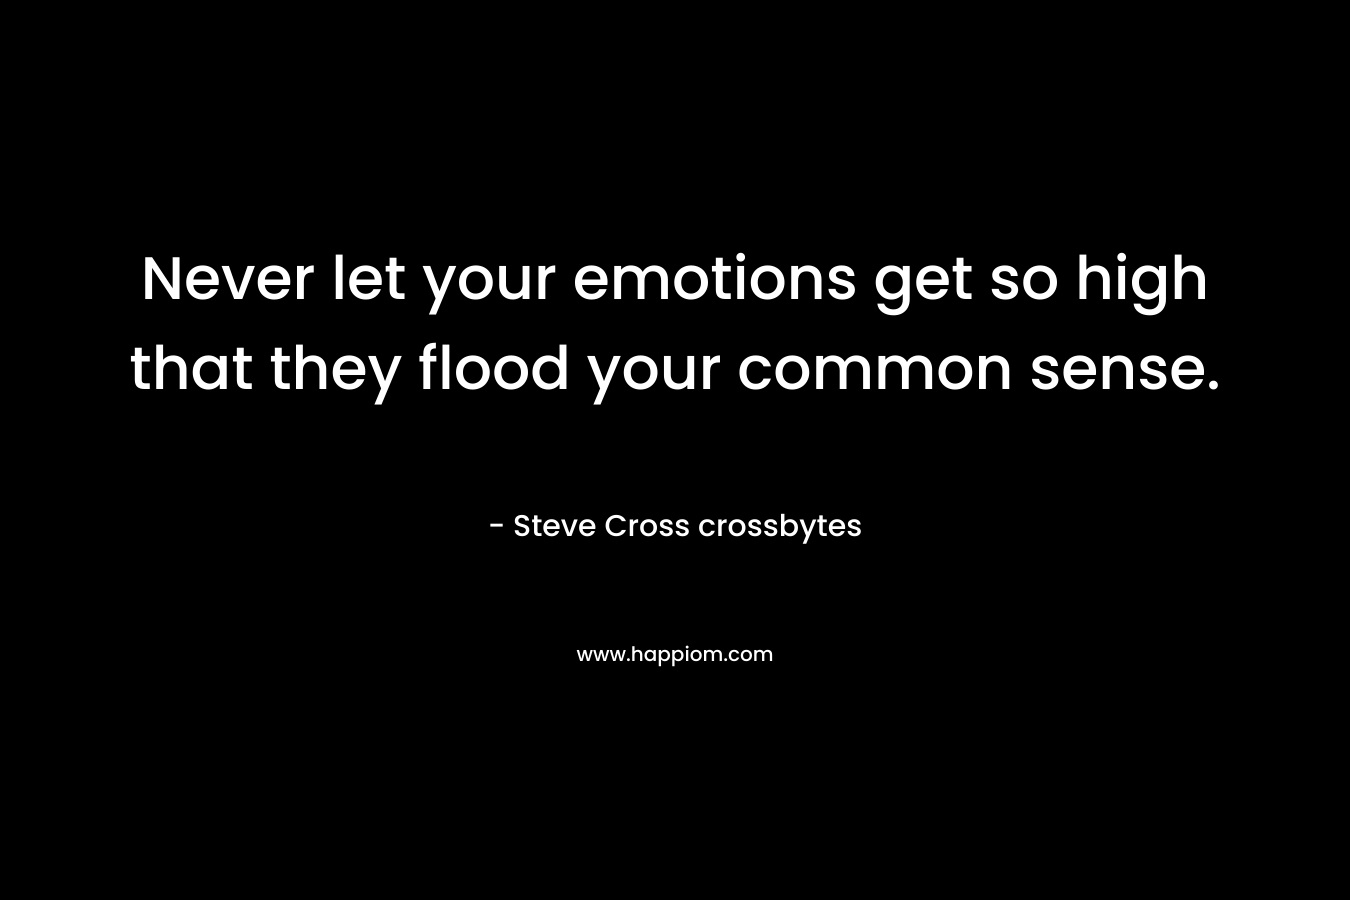 Never let your emotions get so high that they flood your common sense.